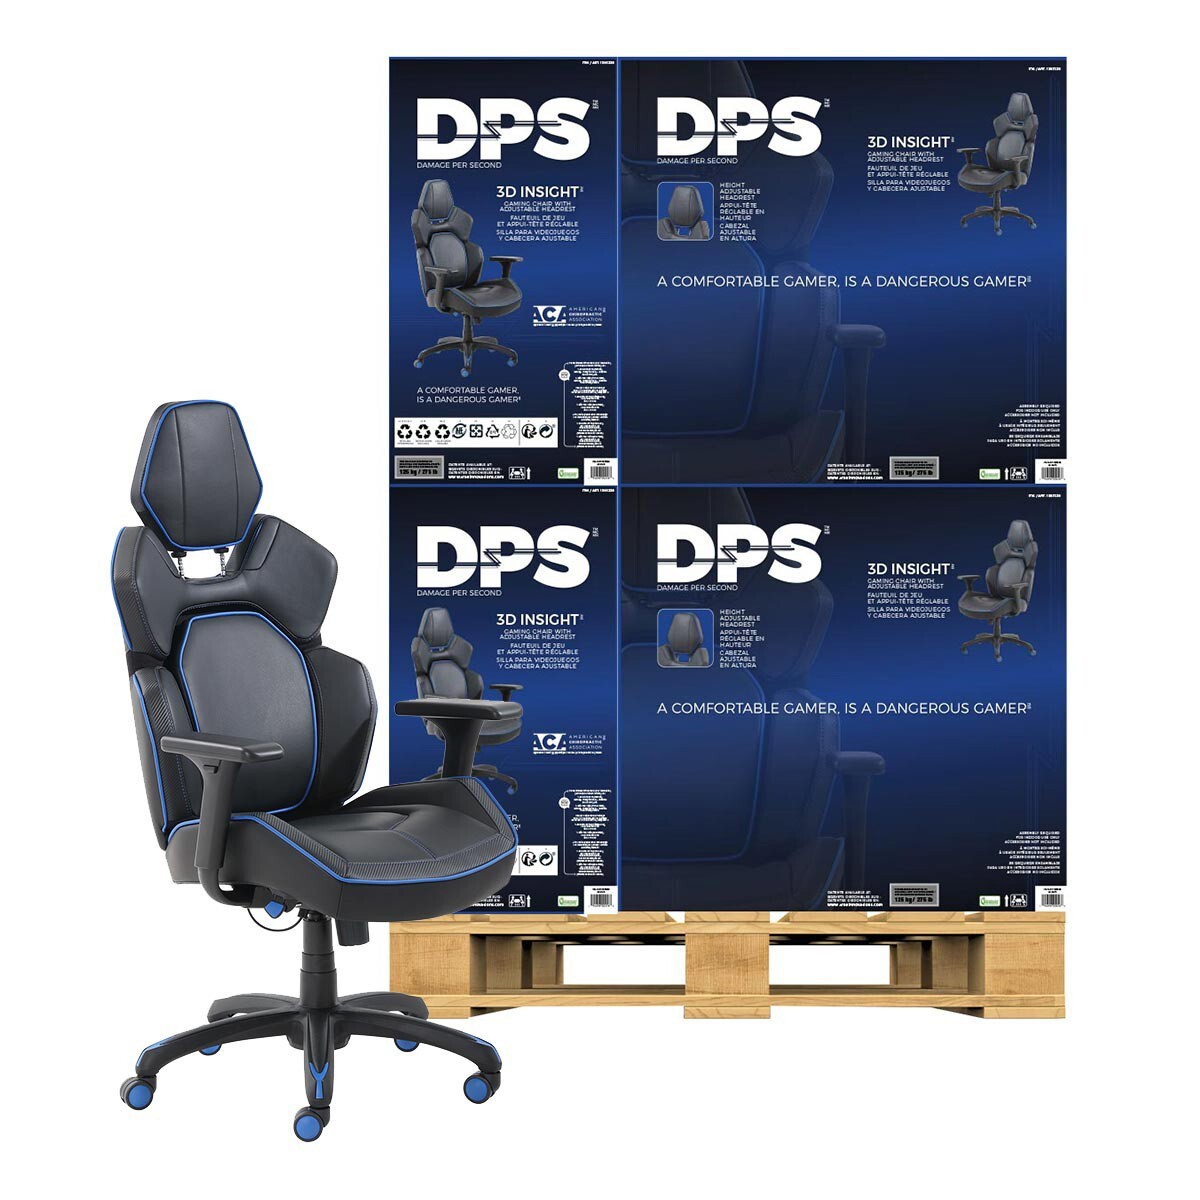 13 Incredible Dps 3D Insight Gaming Chair for 2023